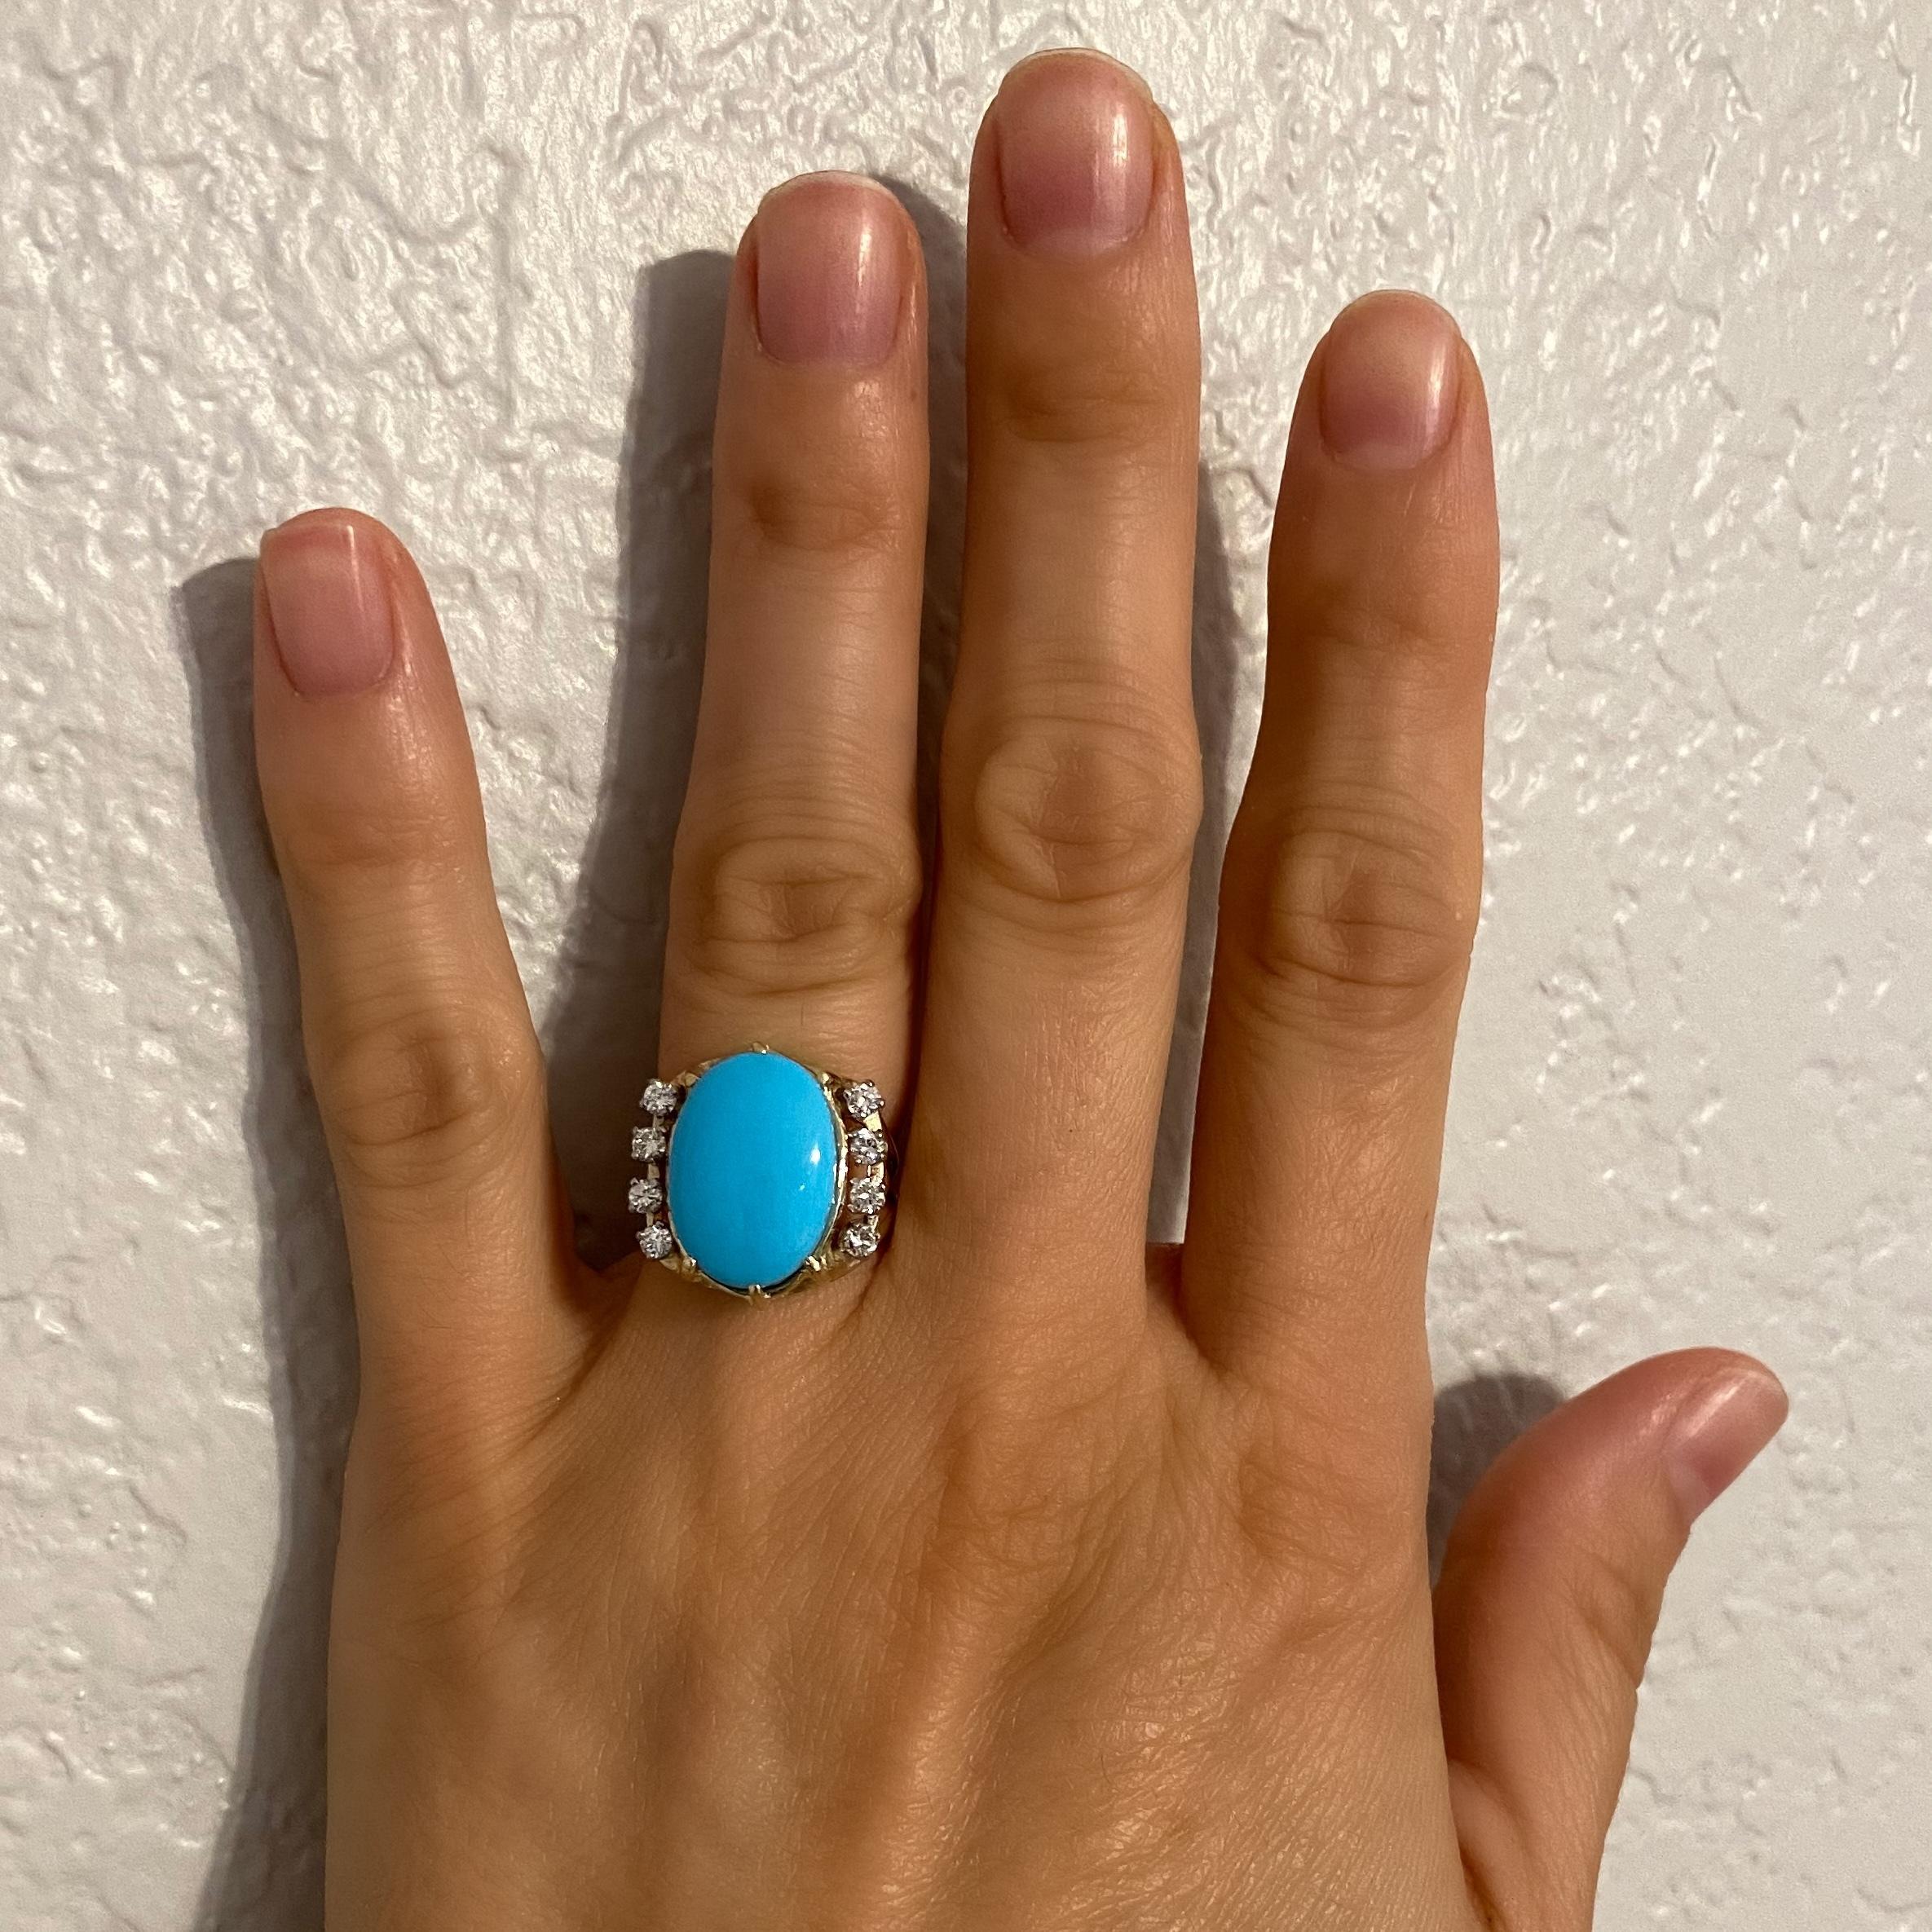 Simply Beautiful! Elegant and finely detailed Turquoise and Diamond Cocktail Ring center set with a securely nestled Oval Cabochon Turquoise weighing approx. 6.45 Carat, either side set with Diamonds. Hand crafted in 14 Karat yellow Gold. Dimensions